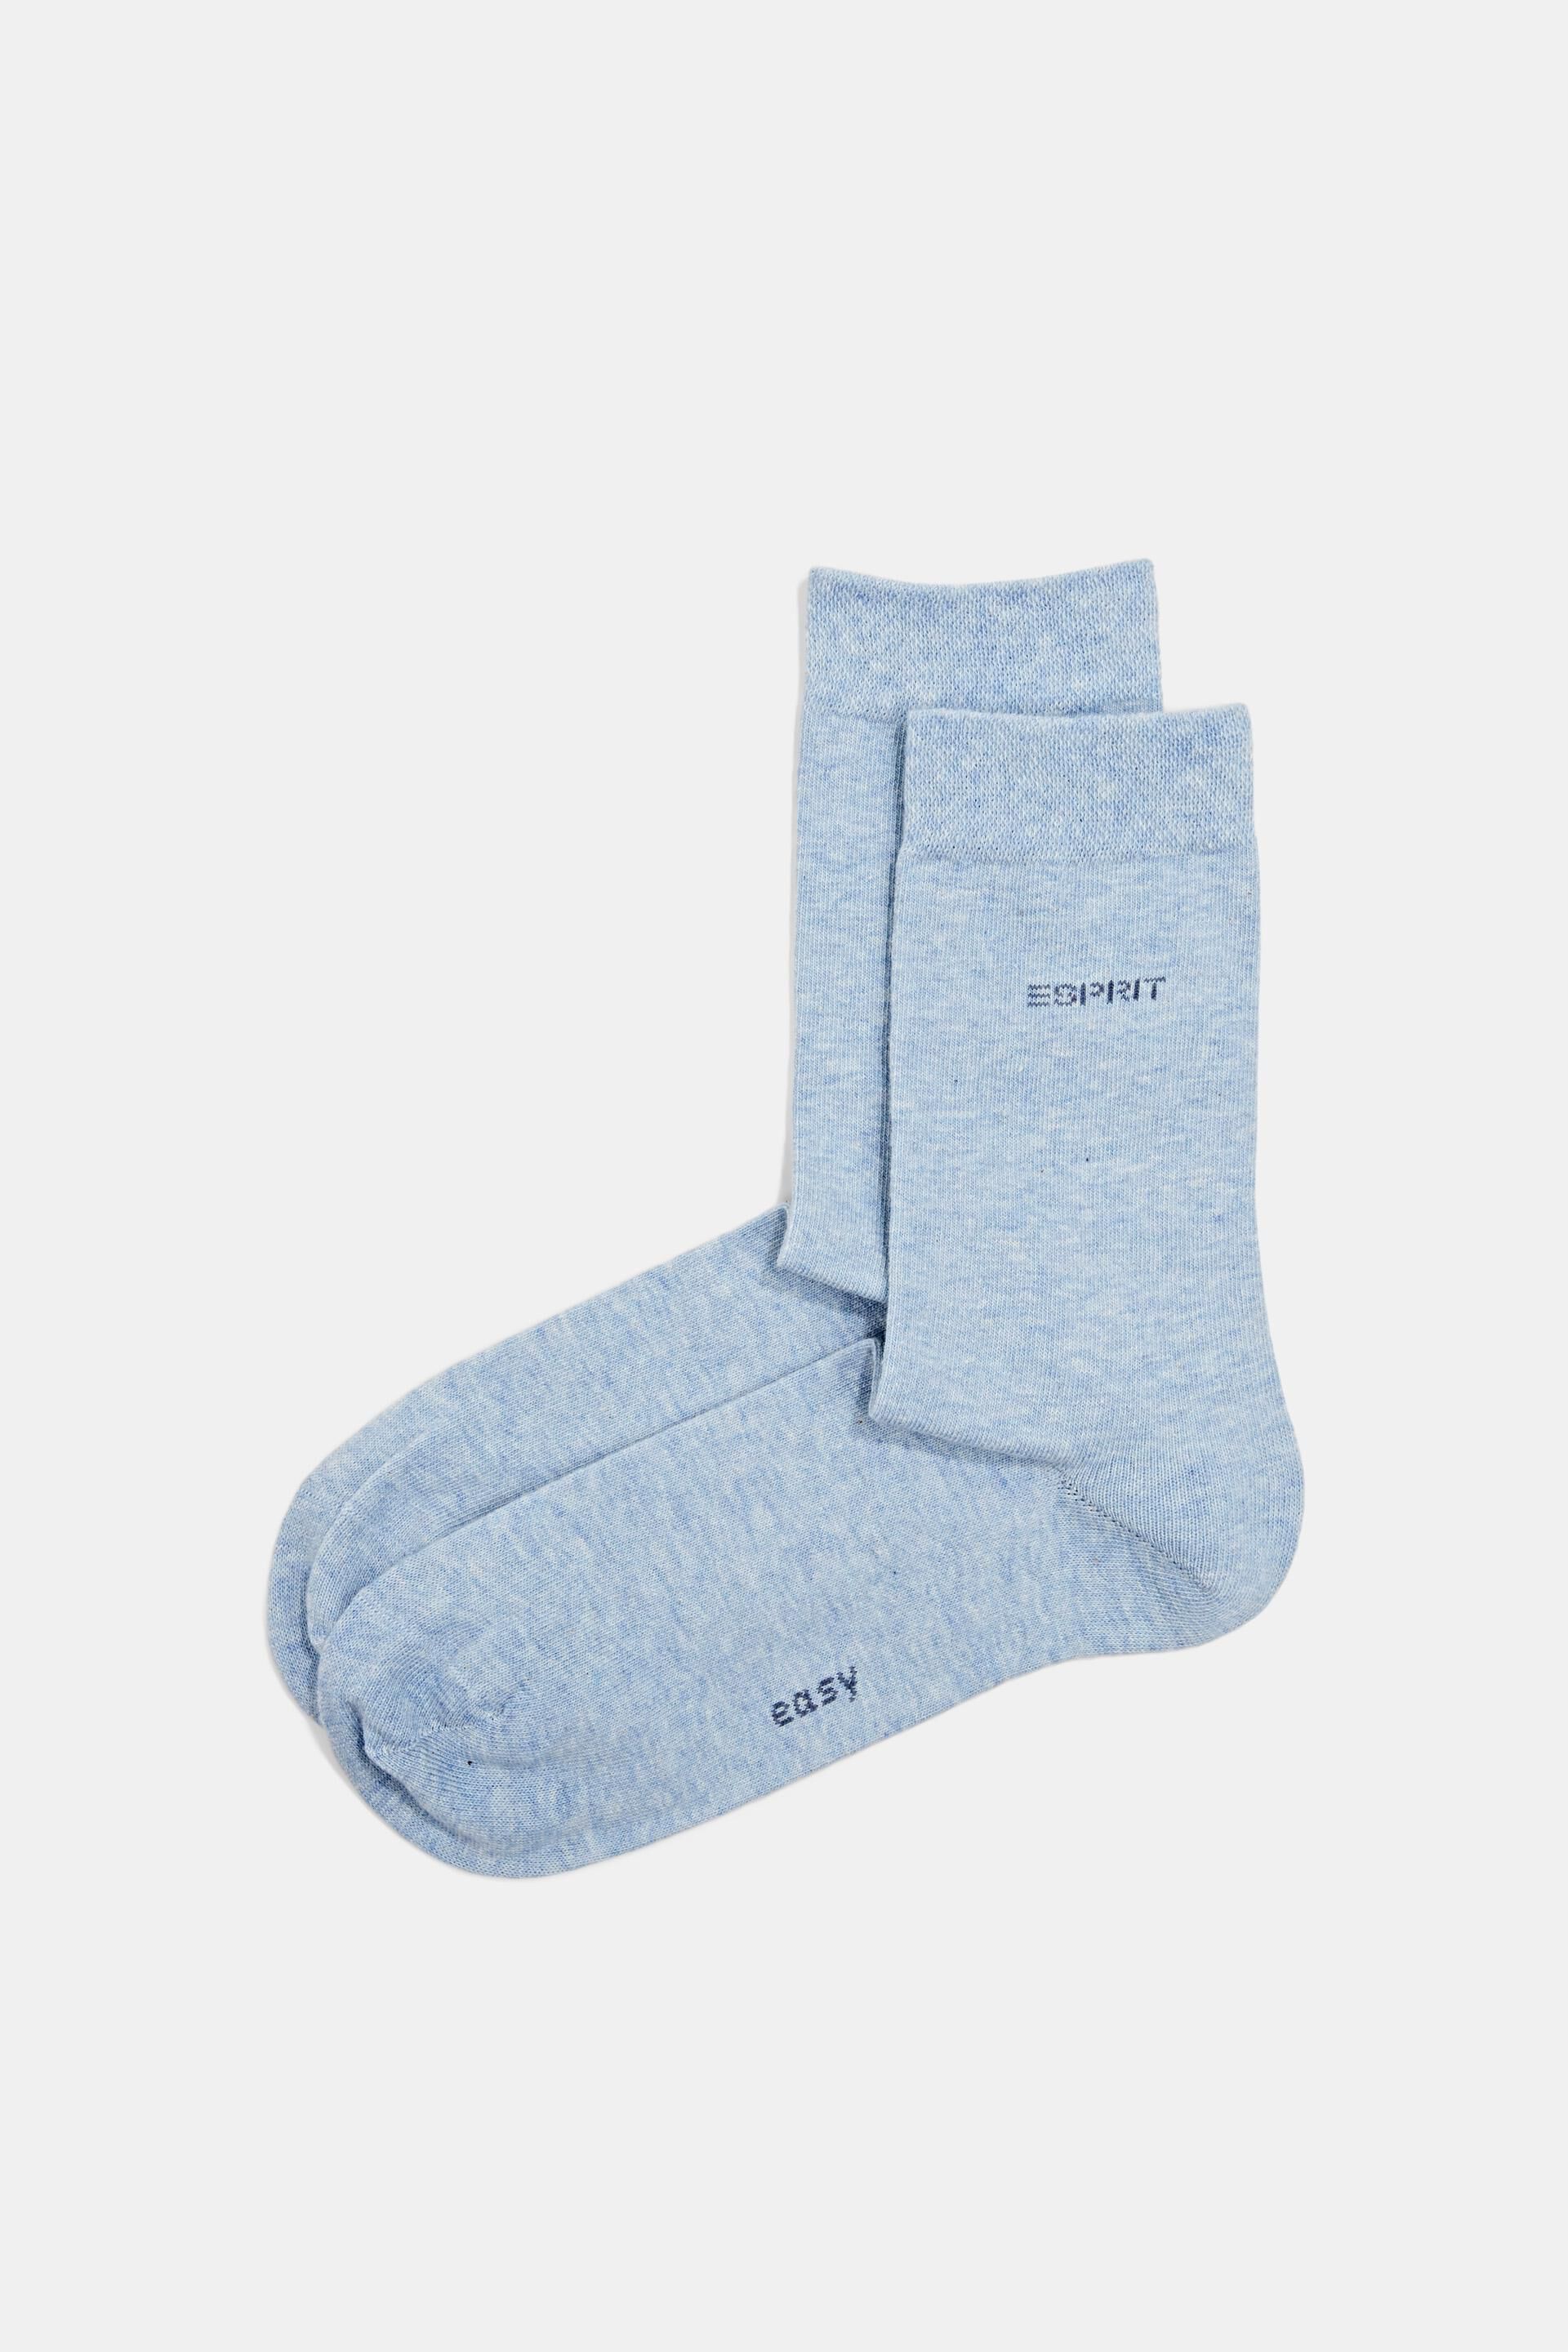 Esprit made blended socks pack of cotton Double organic